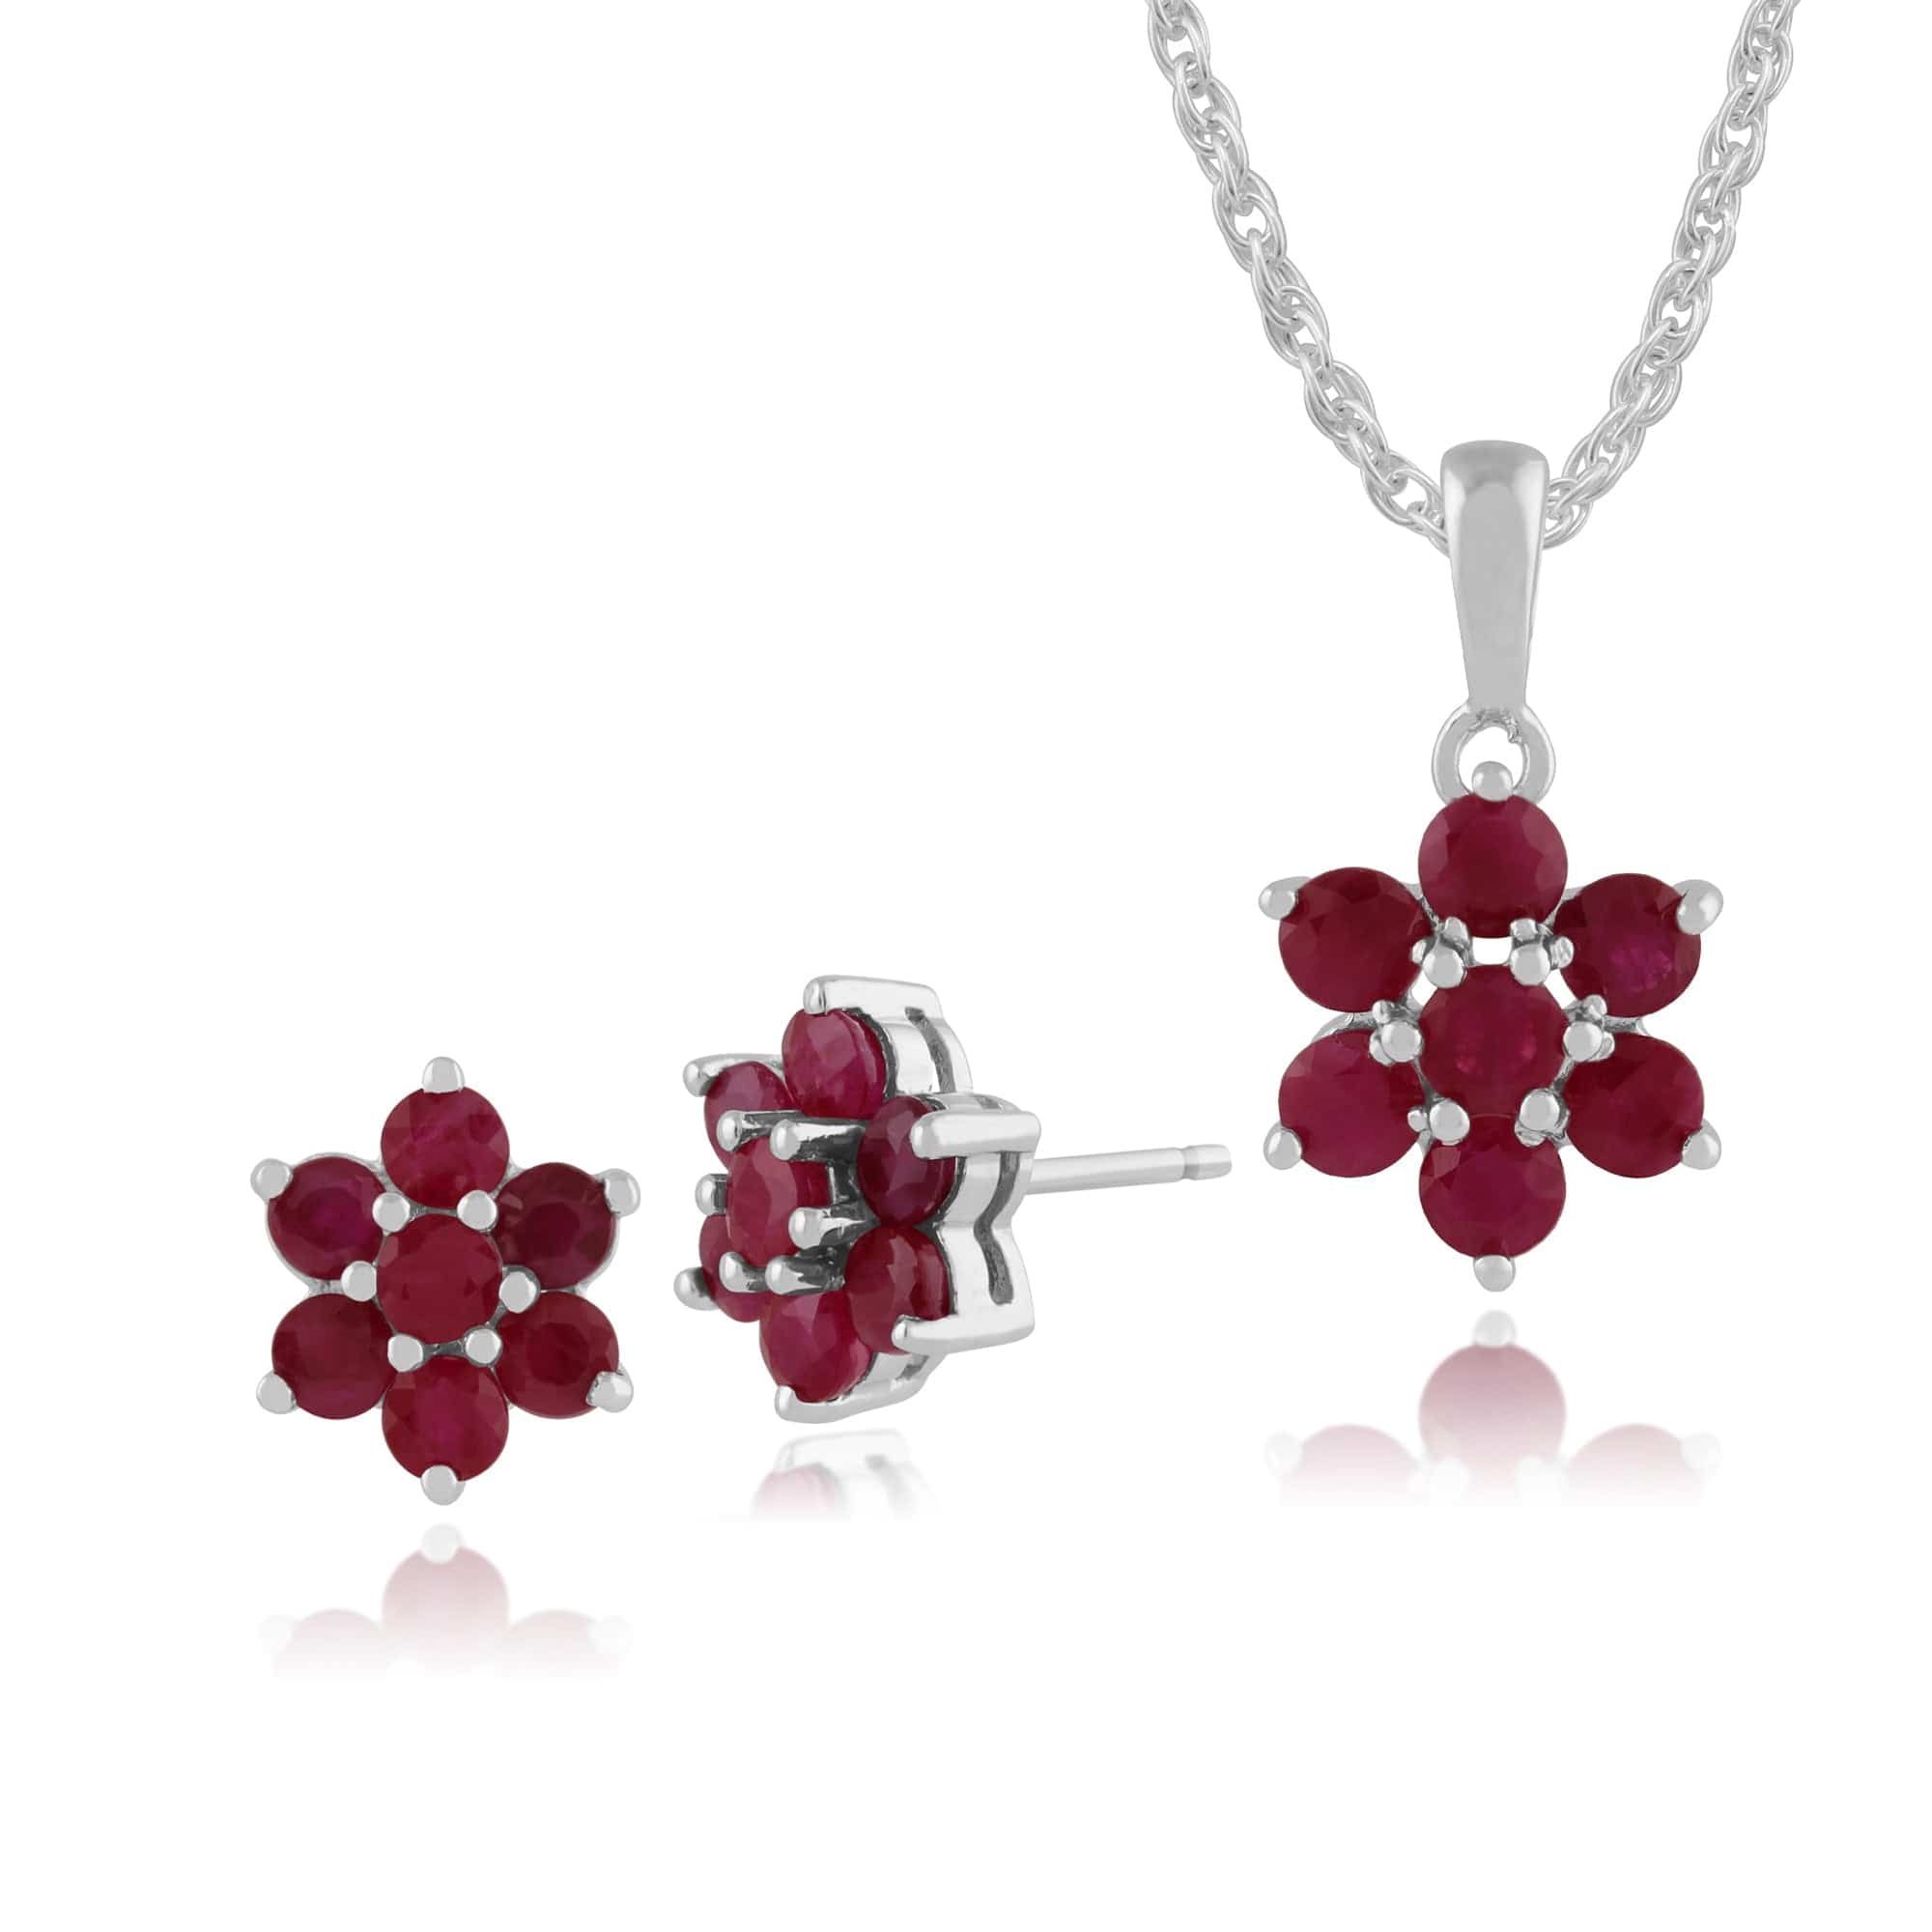 270E014008925-270P0169079 Floral Round Ruby Flower Cluster Stud Earrings & Pendant Set in 925 Sterling Silver 1